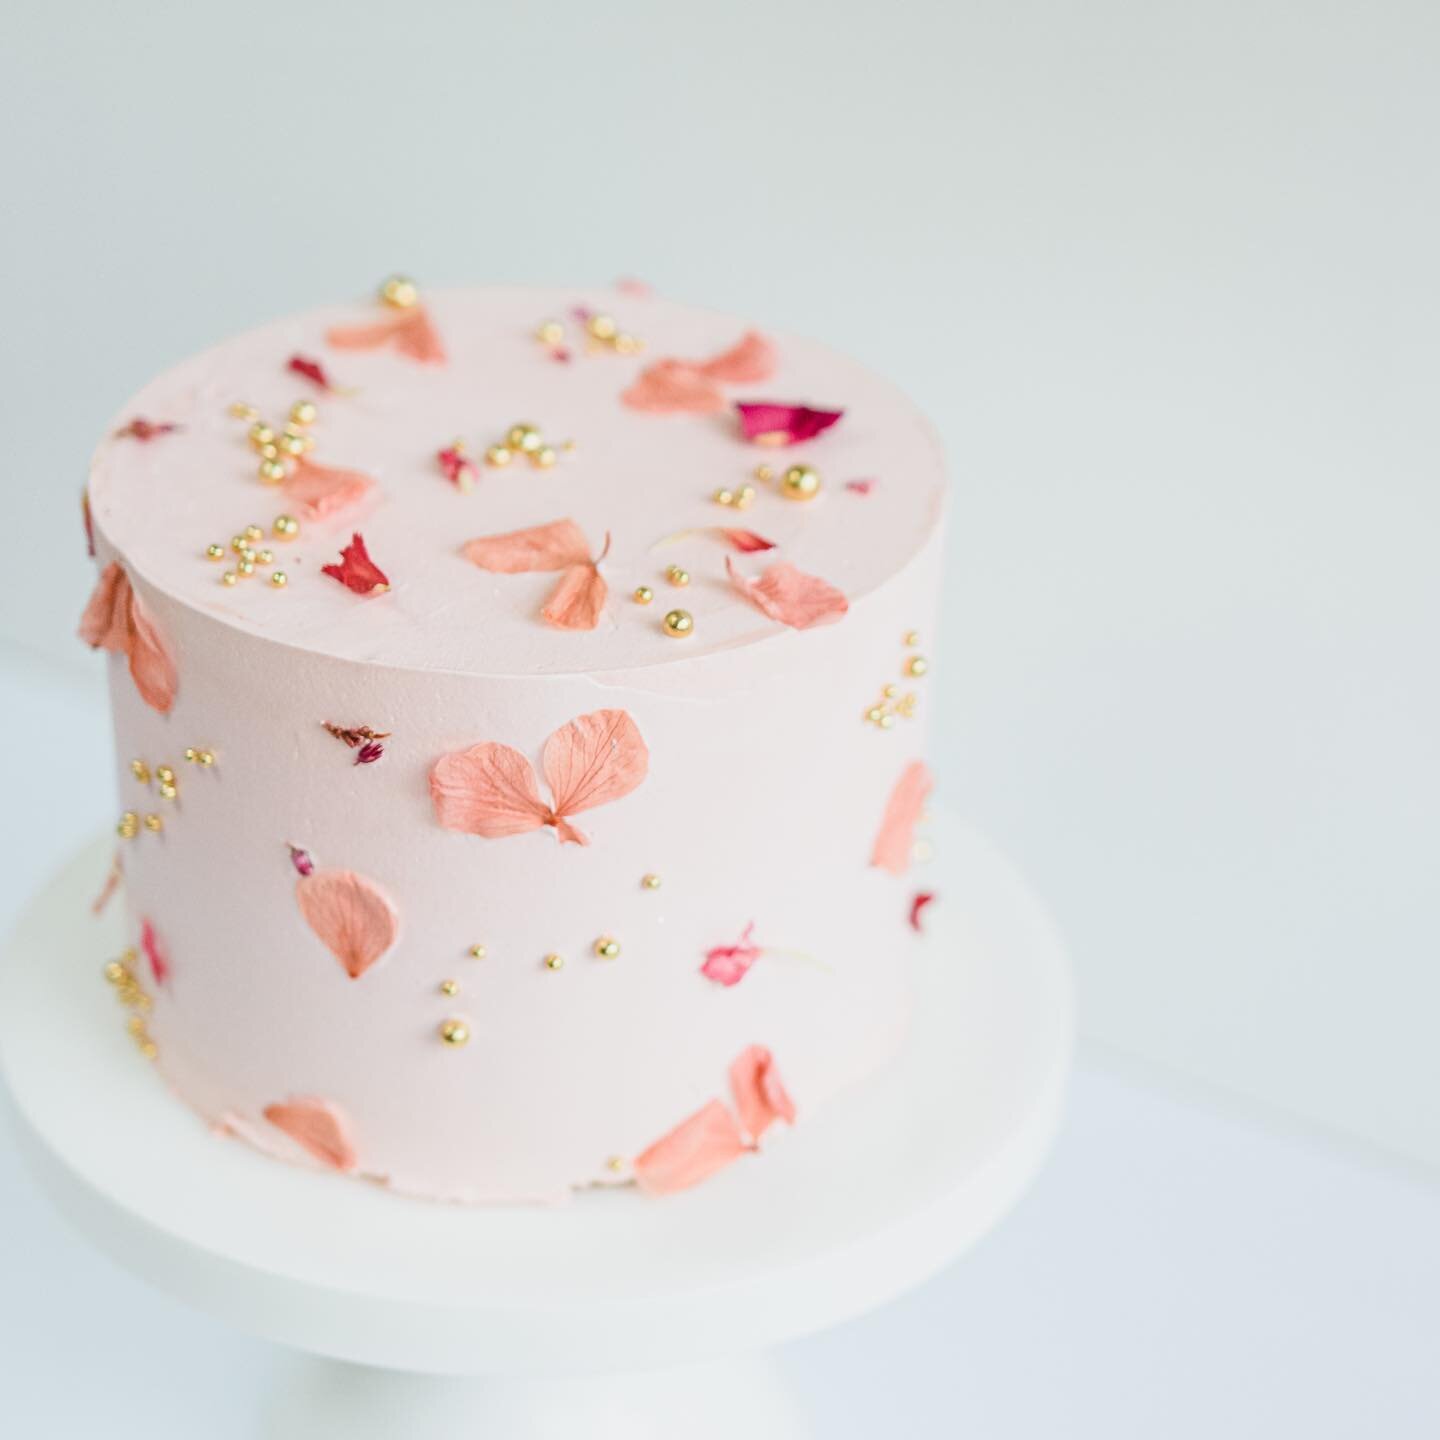 MINI CAKE / this cute little mini cake is thoughtfully decorated with luxe gold sprinkles and preserved florals. It is perfect for gifting, sharing with family and friends or ordering for yourself as a little Mother&rsquo;s Day treat (I suggest eatin